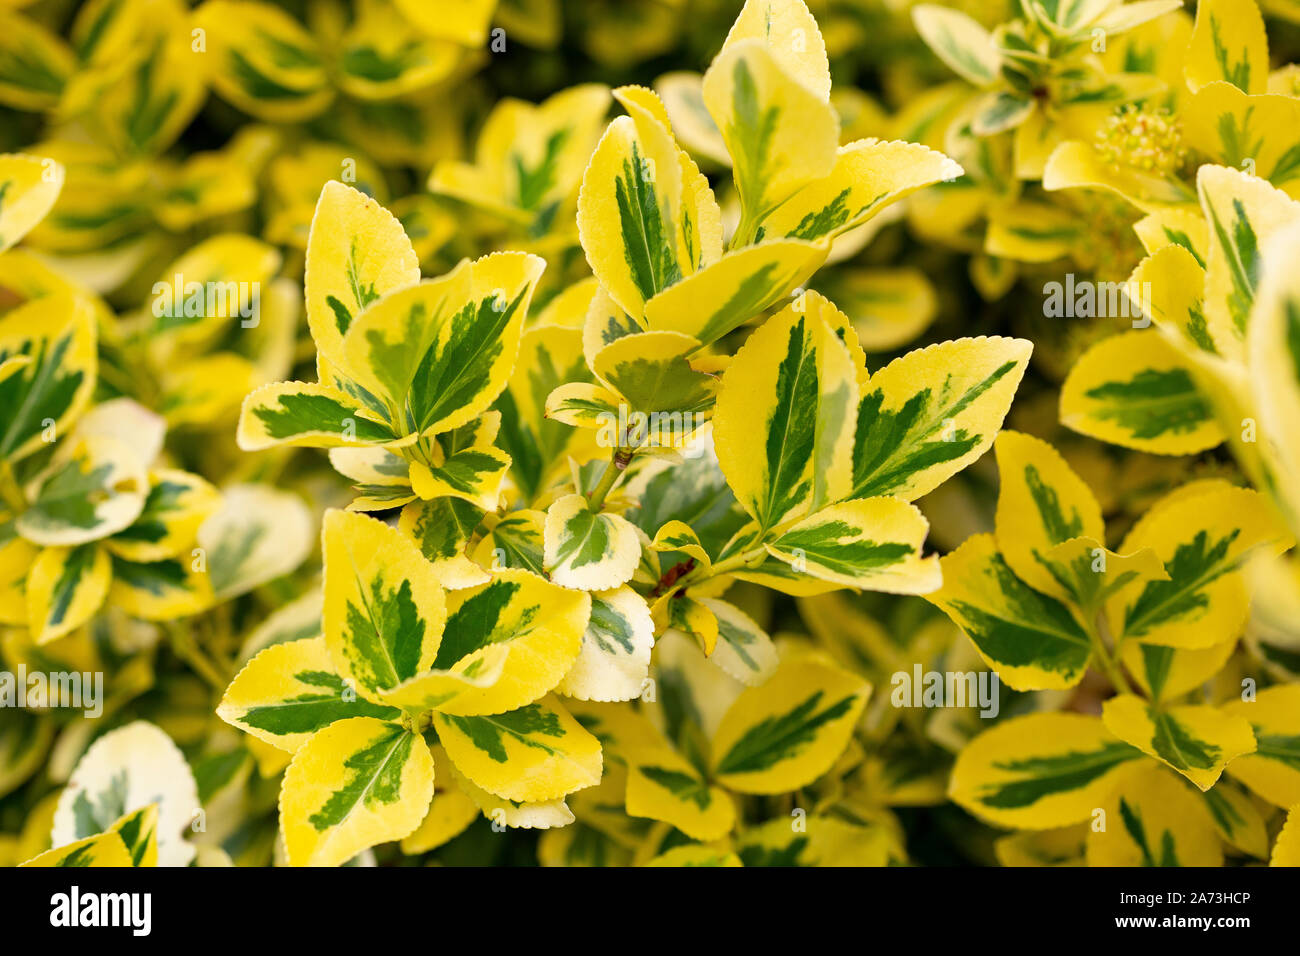 Euonymus fortunei 'Emerald 'n' Gold' Stock Photo